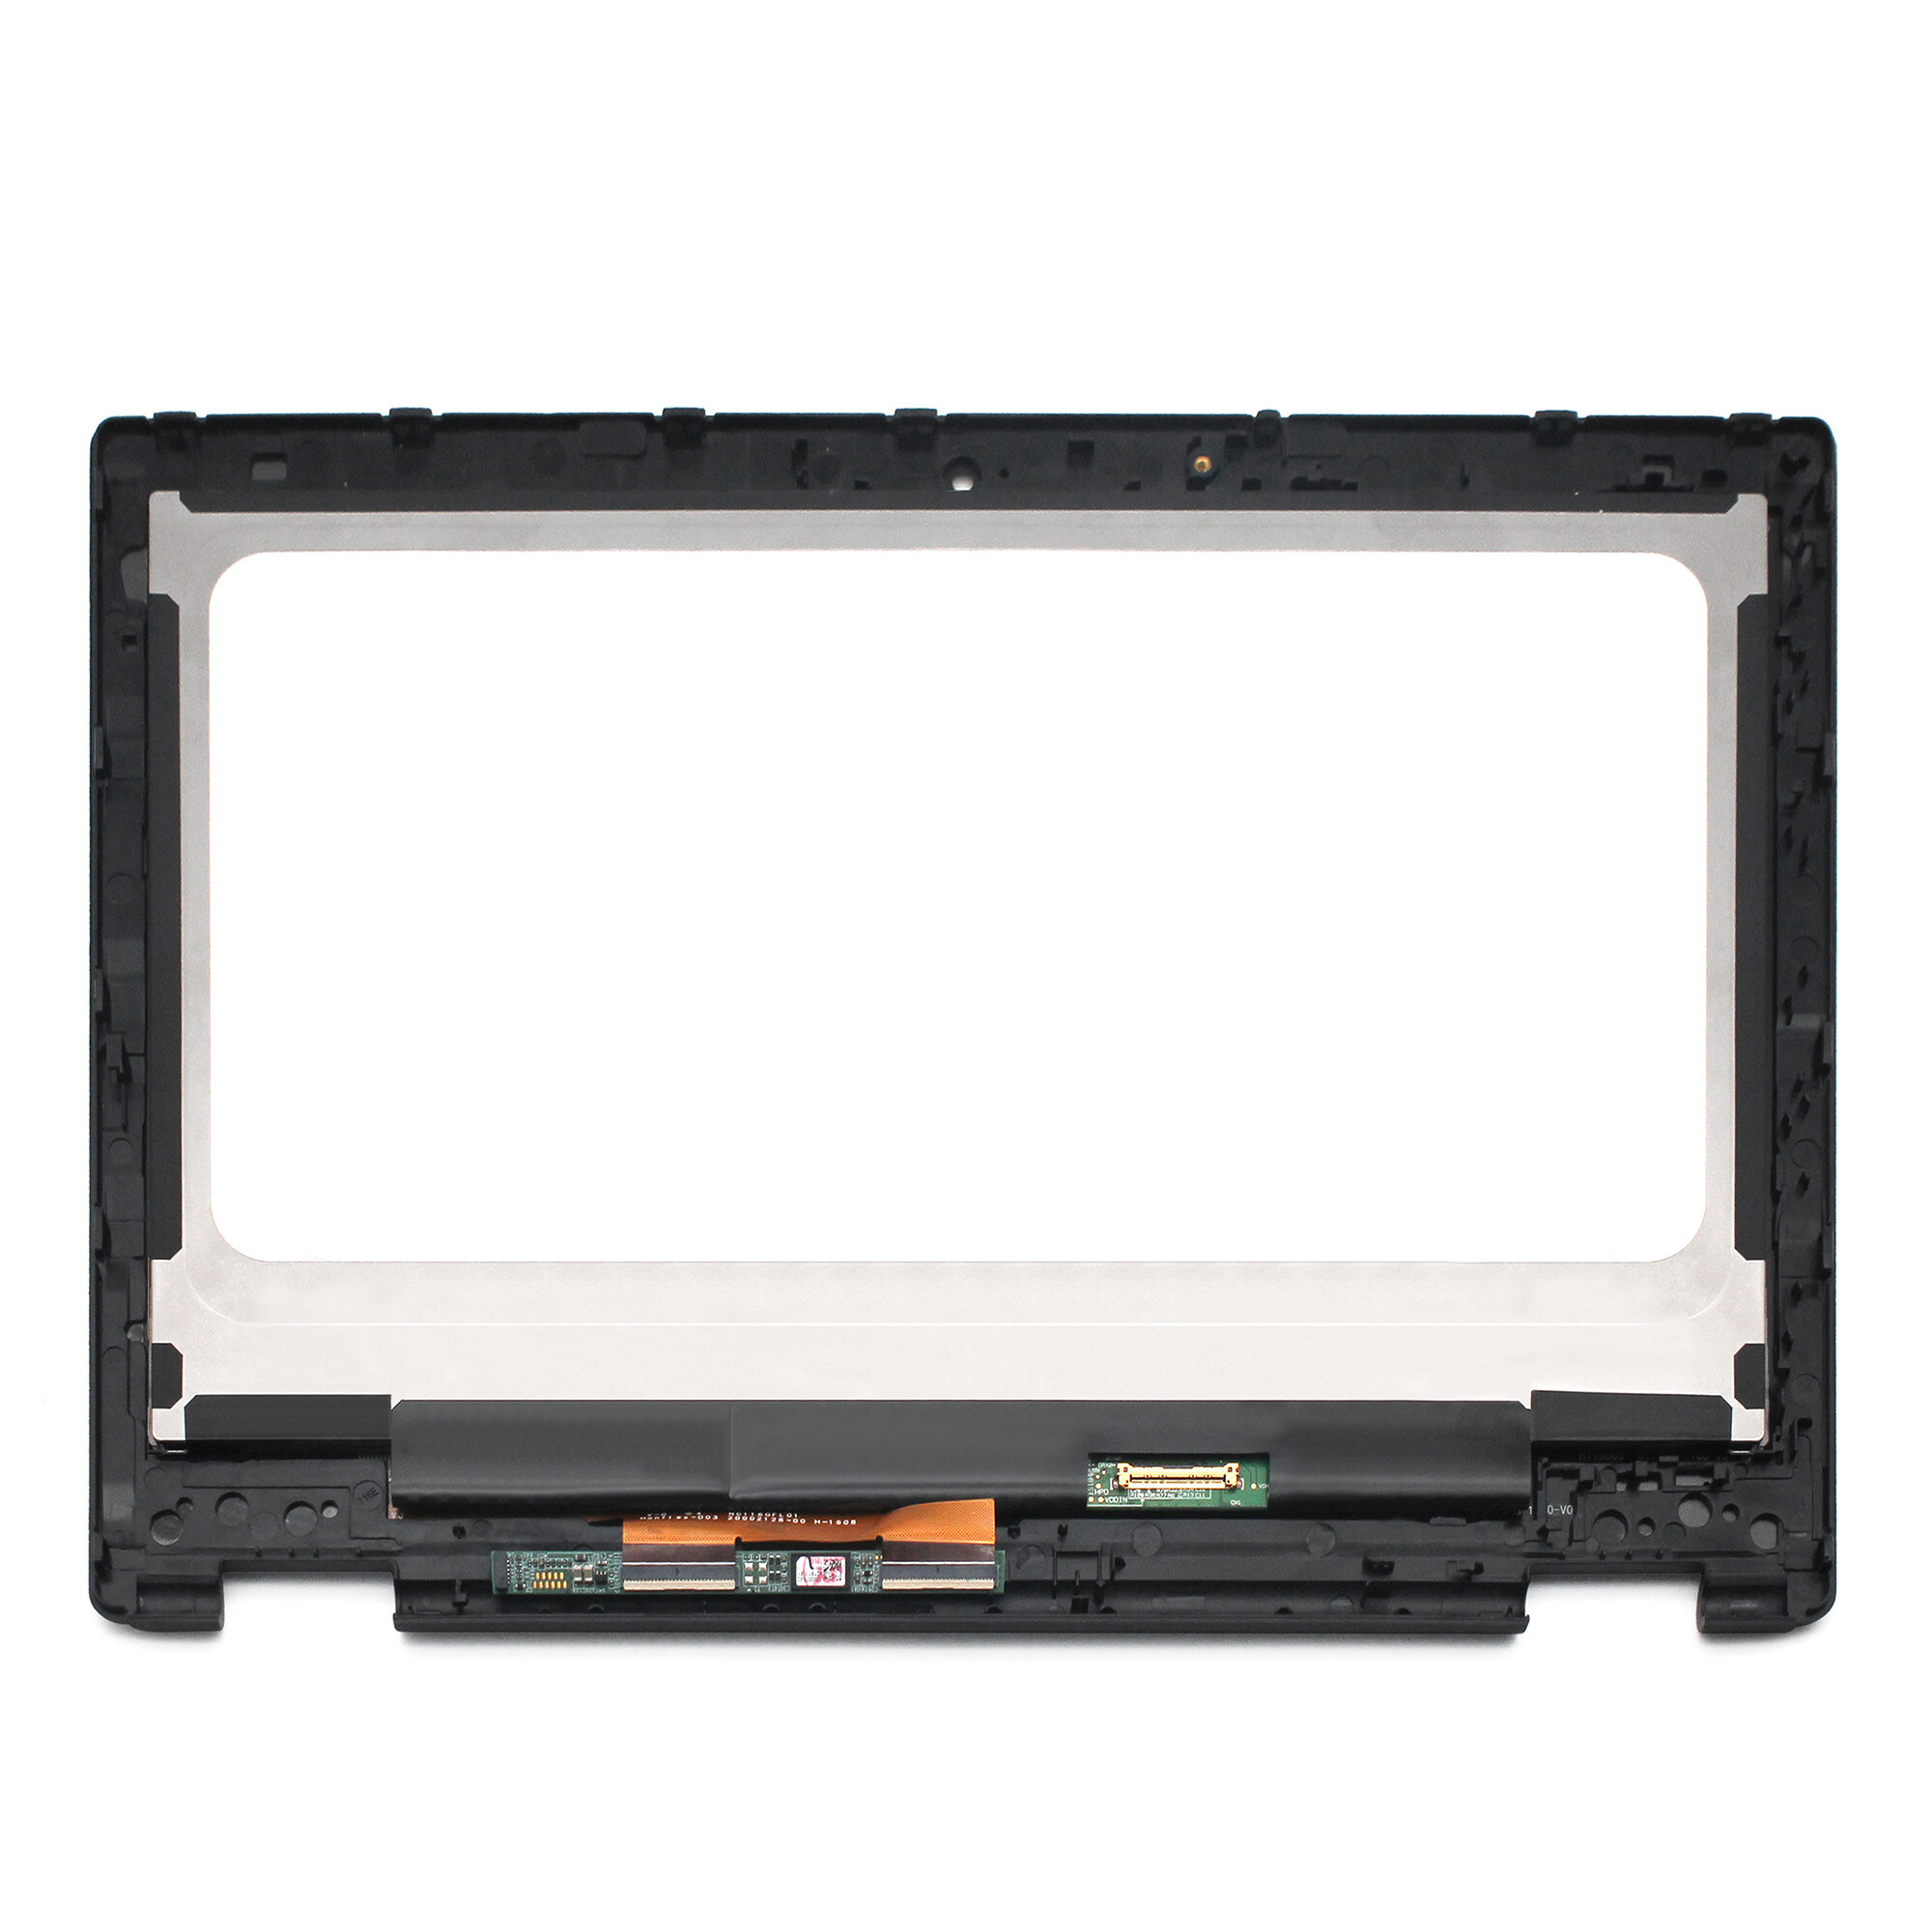 11.6" HD LED LCD Touchscreen Digitizer Assembly With Bezel for Acer Chromebook R11 CB5-132T-C4LB CB5-132T-C1LK CB5-132T N15Q8